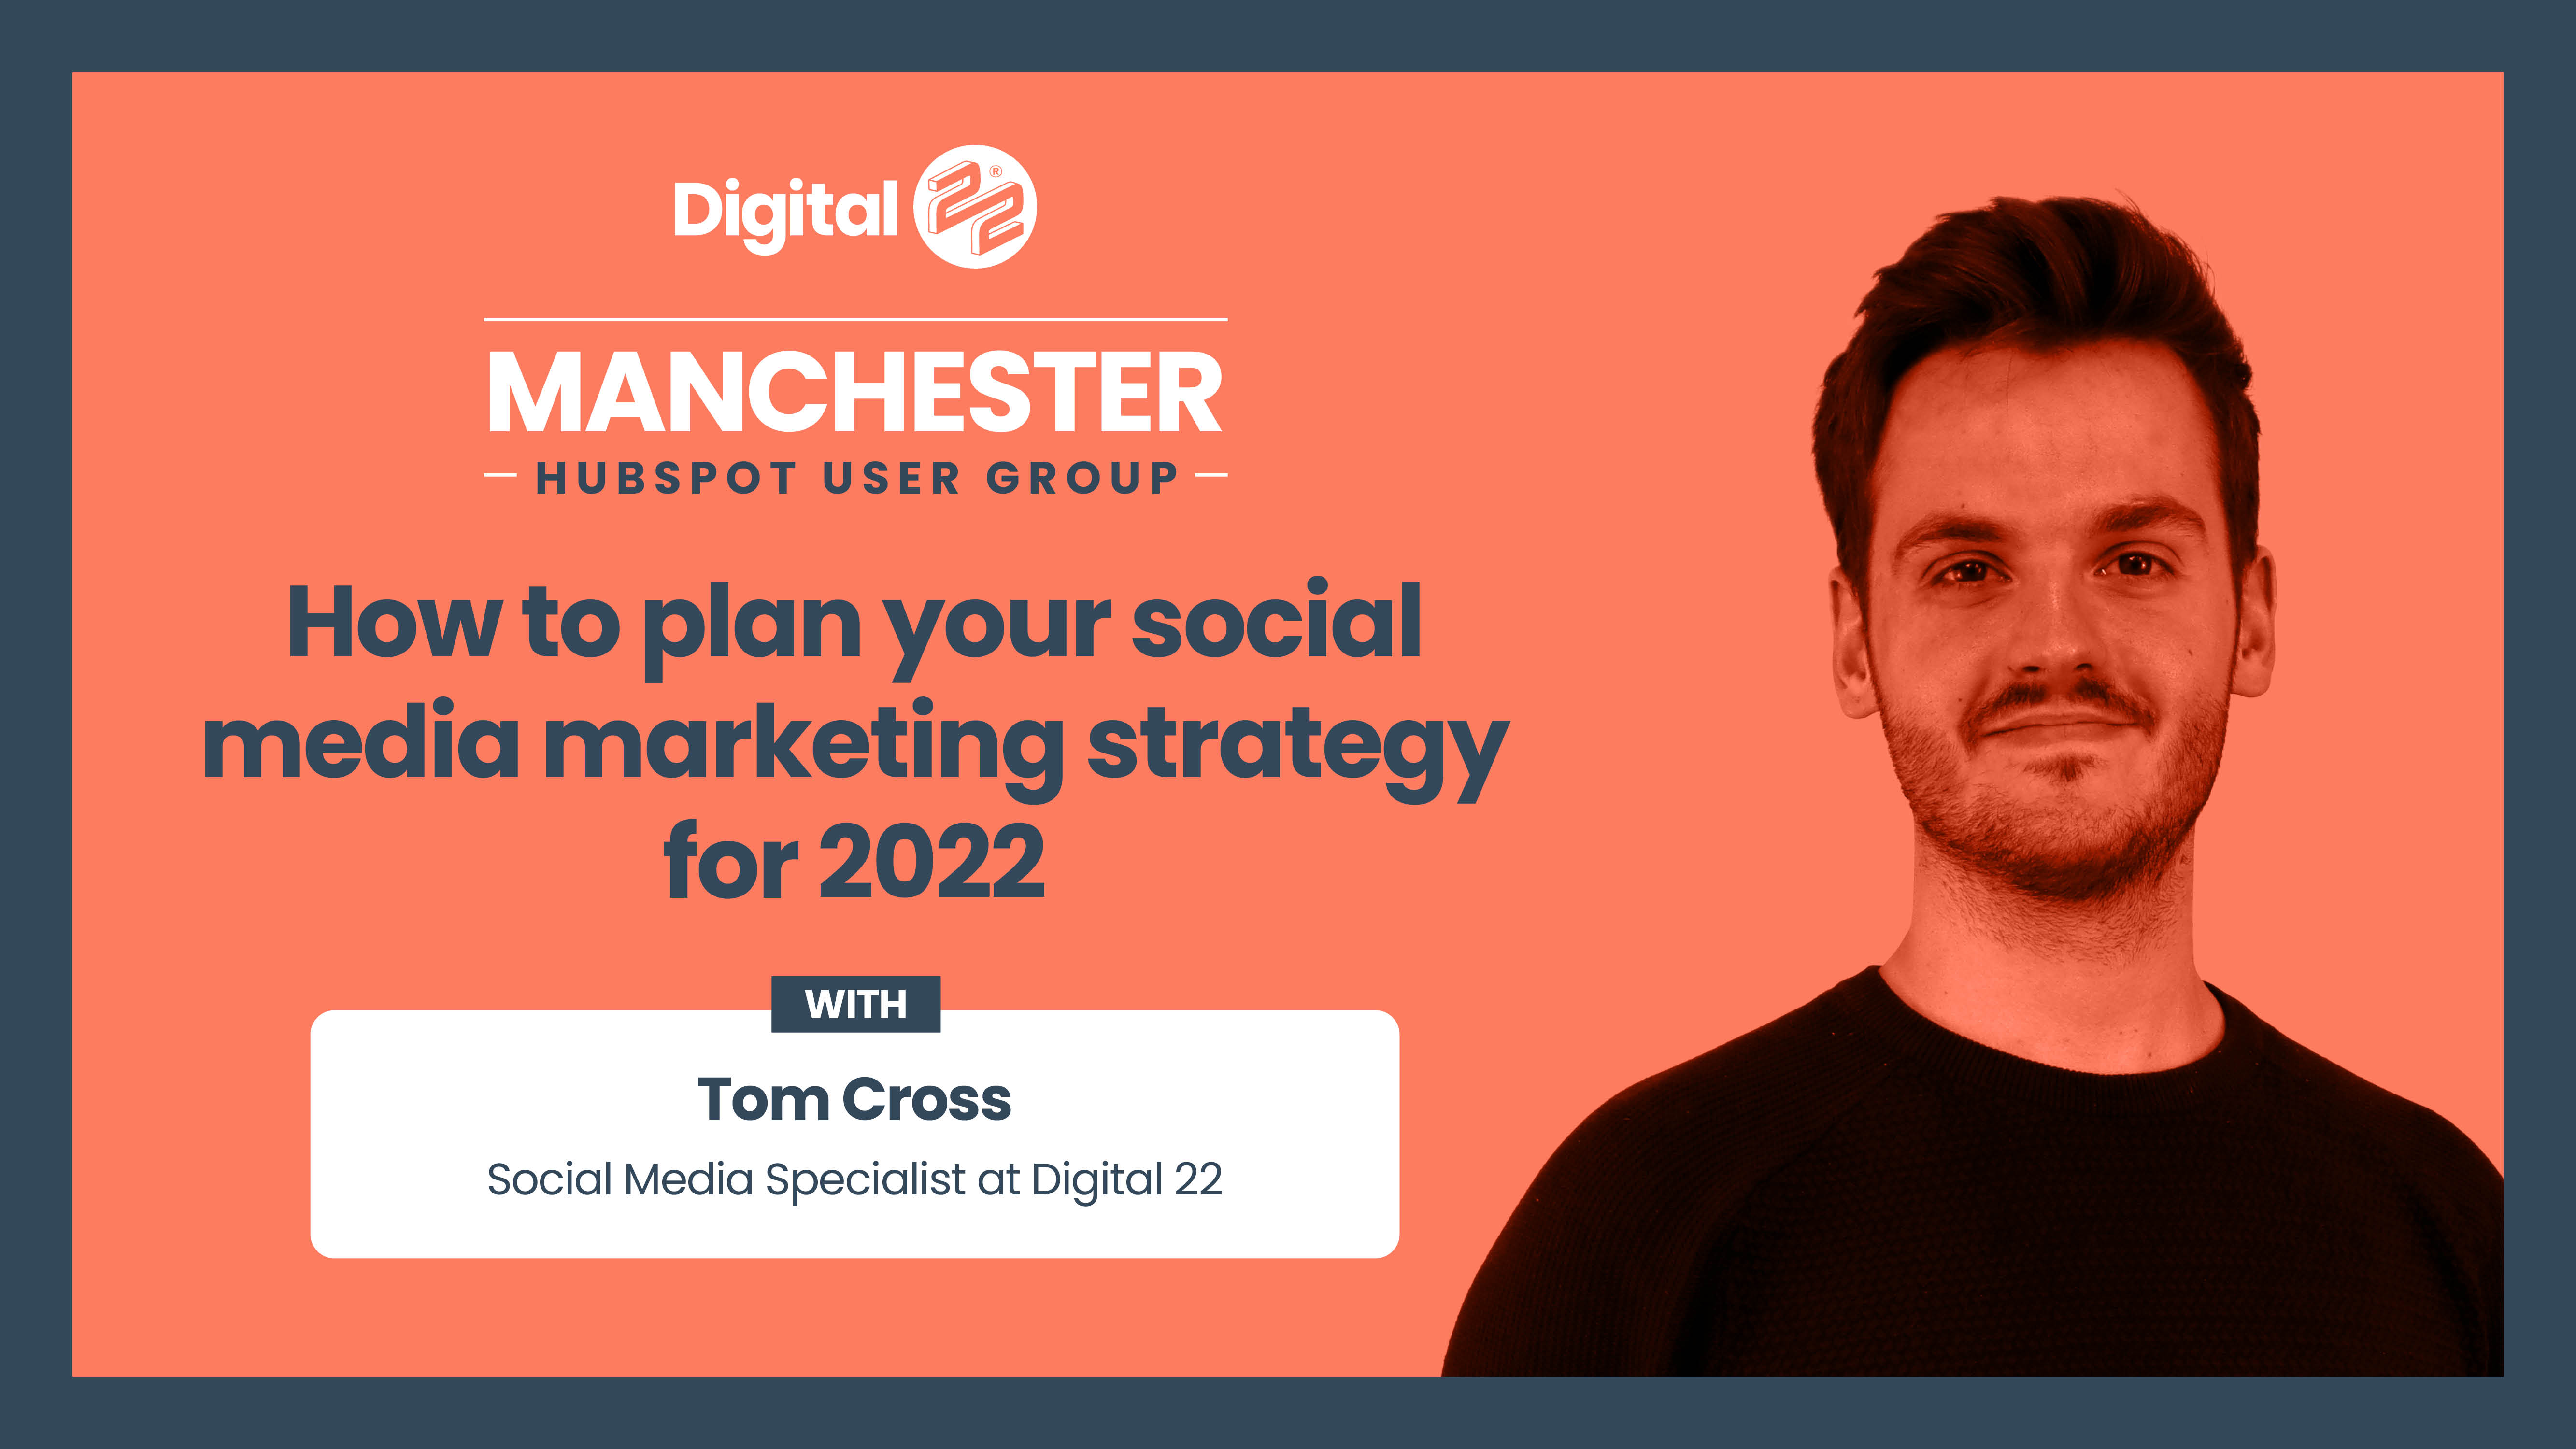 How to plan your social media marketing strategy for 2022